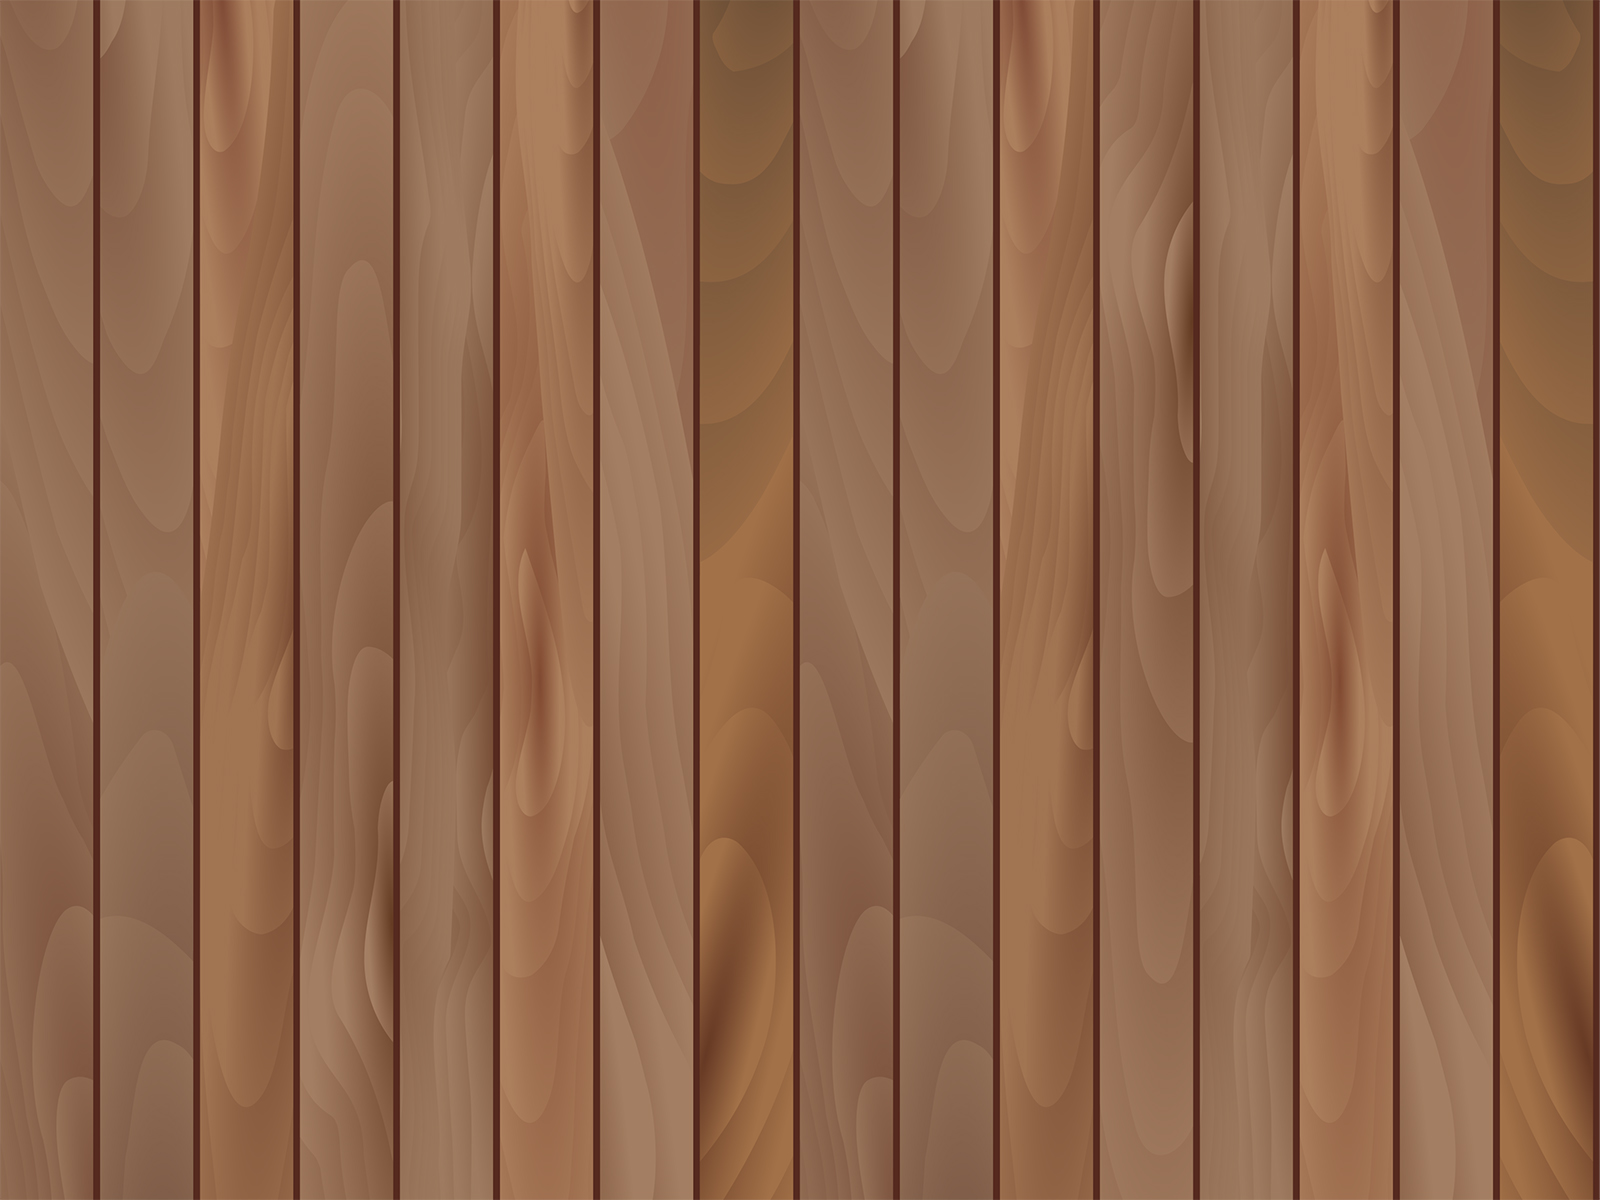 Wood Texture Backgrounds | Cartoon Templates | Free PPT Grounds and